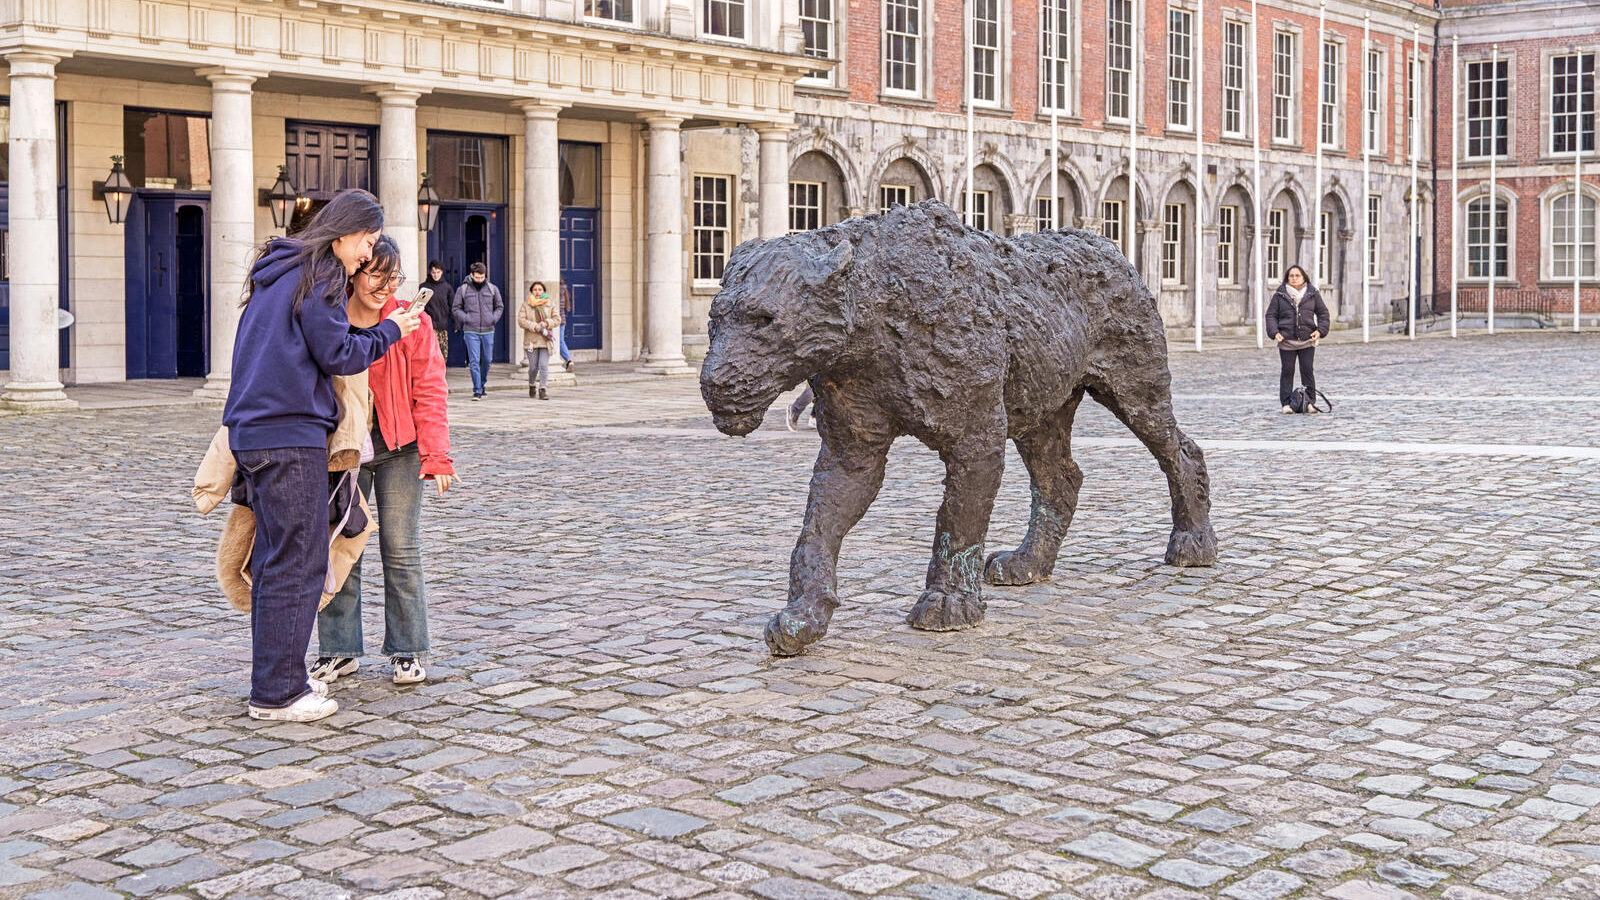 HOW DARE YOU CALL ME KITTY [BRONZE LIONESS BY DAVIDE RIVALTA IN THE UPPER COURTYARD DUBLIN CASTLE]-228100-1